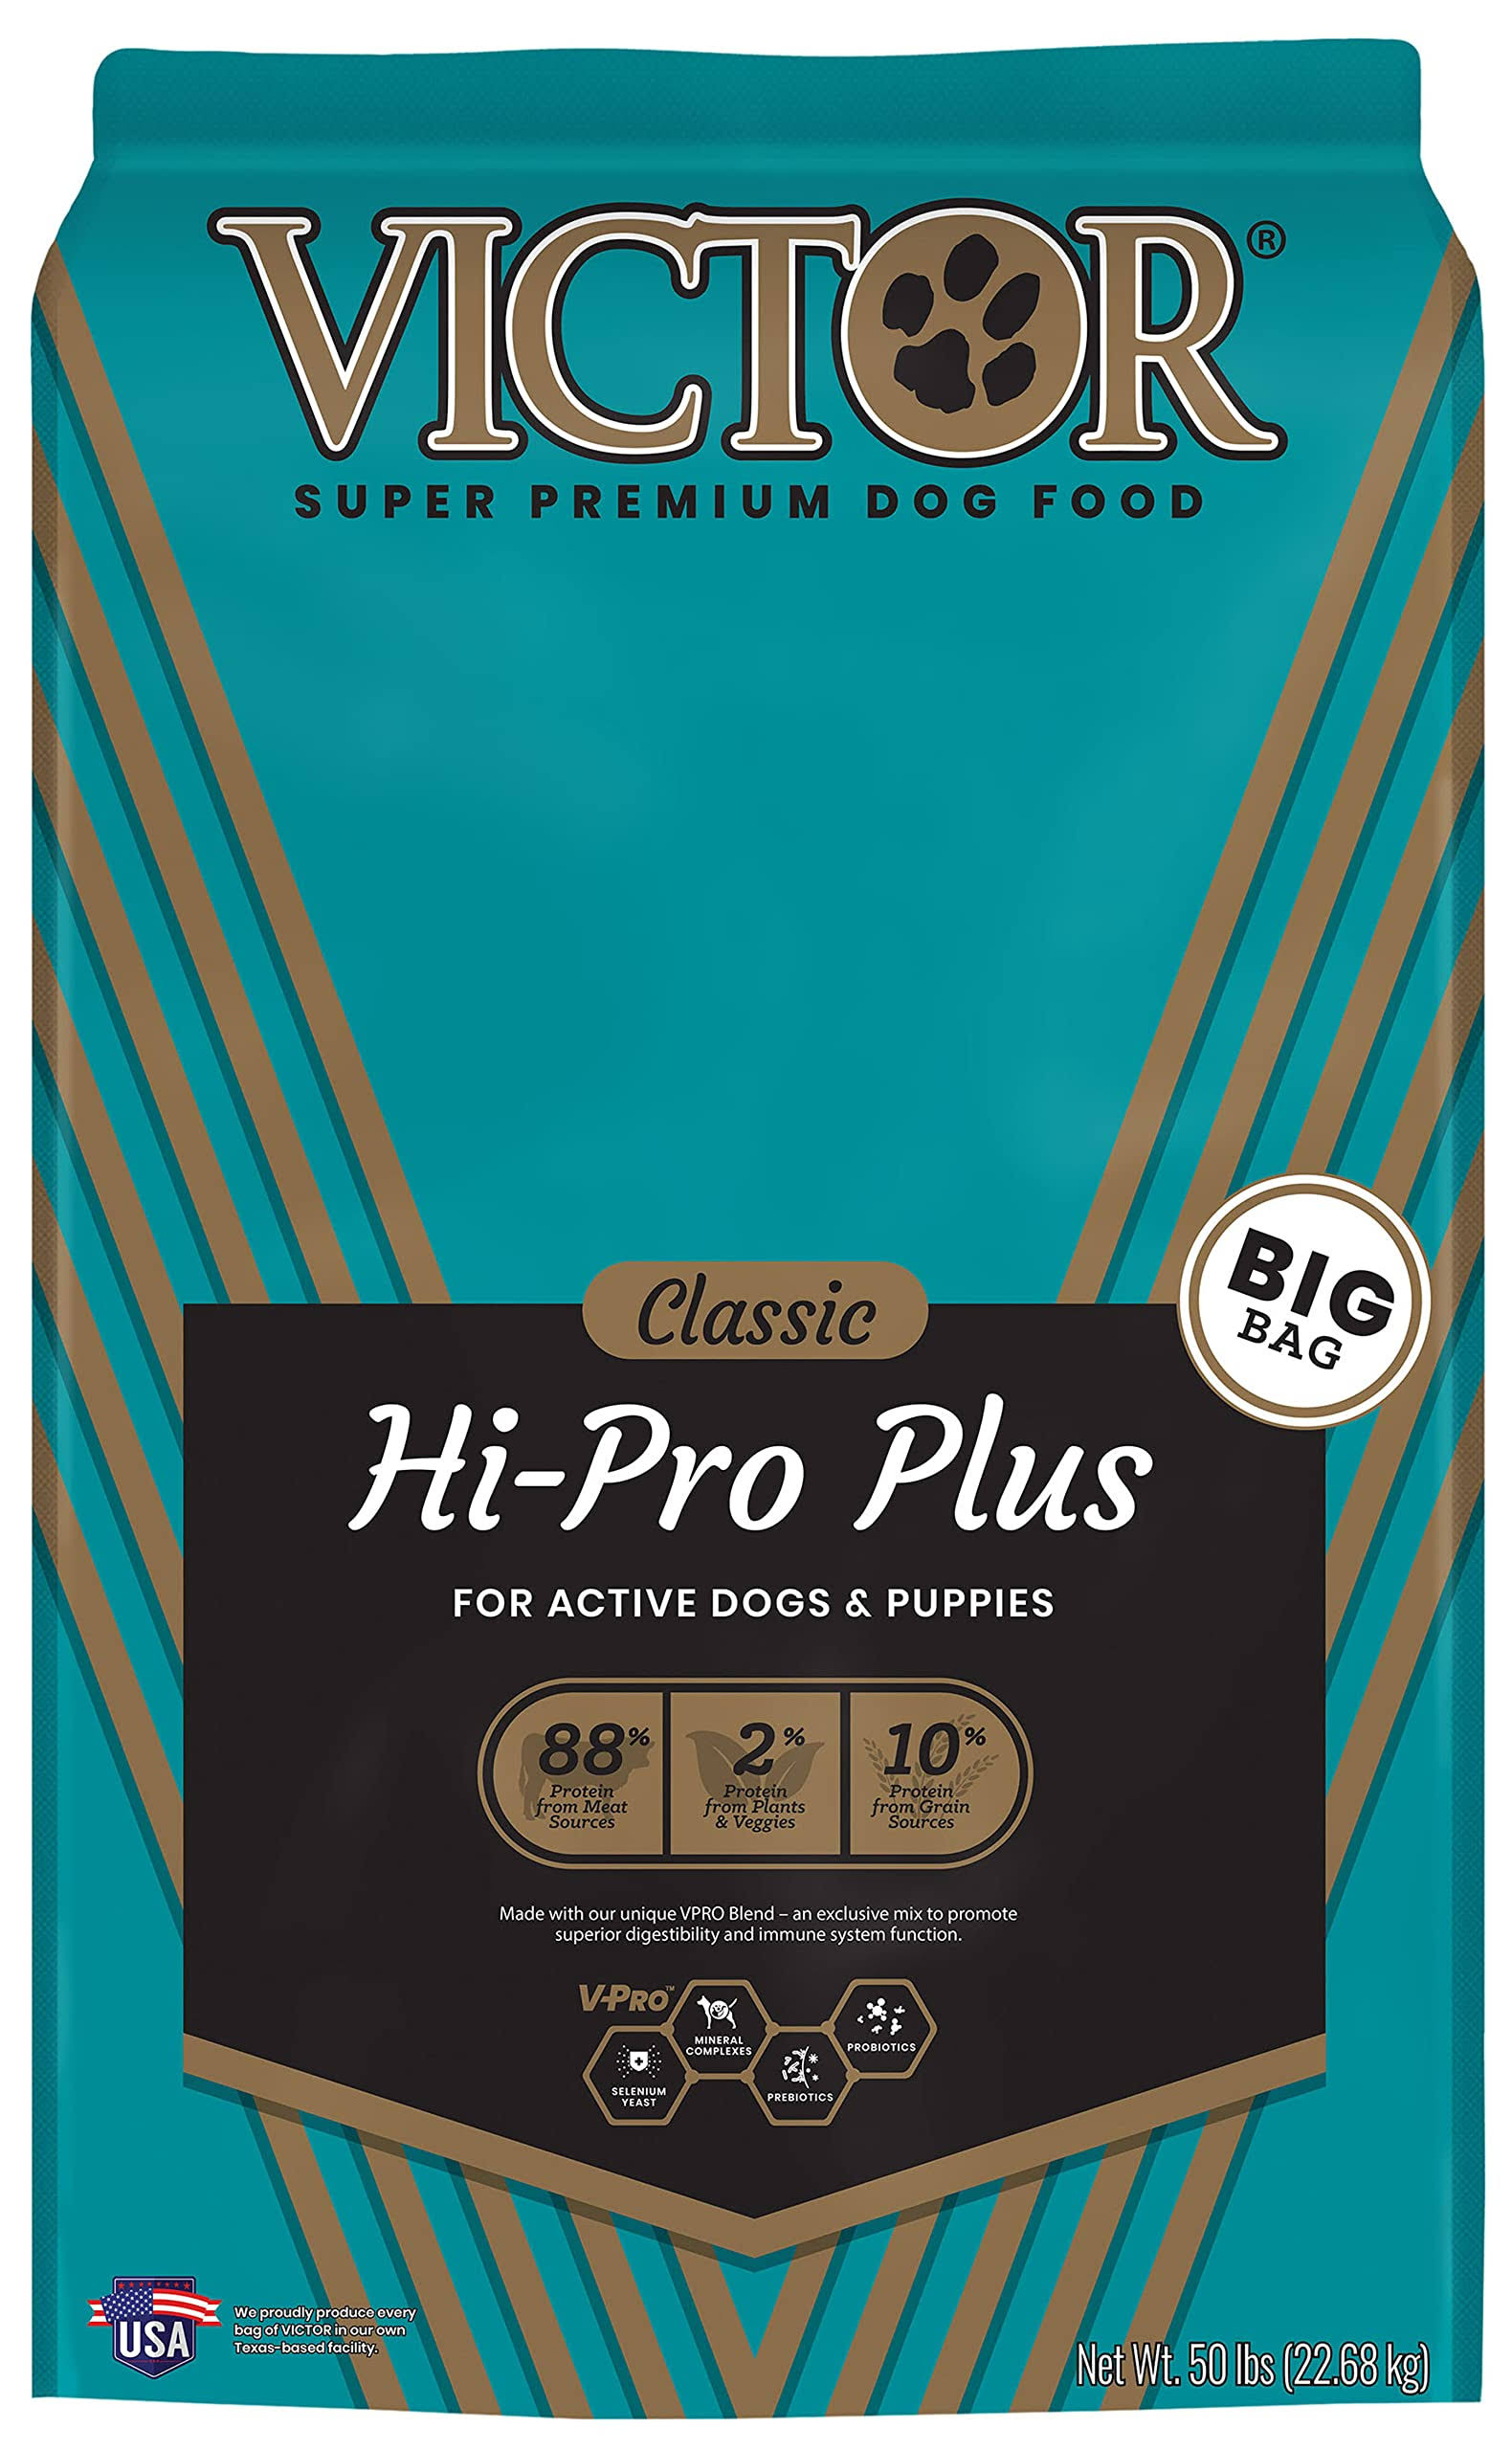 Victor Dog Food Select Hi-pro Plus Formula for Active Dogs and Puppies - 5lbs